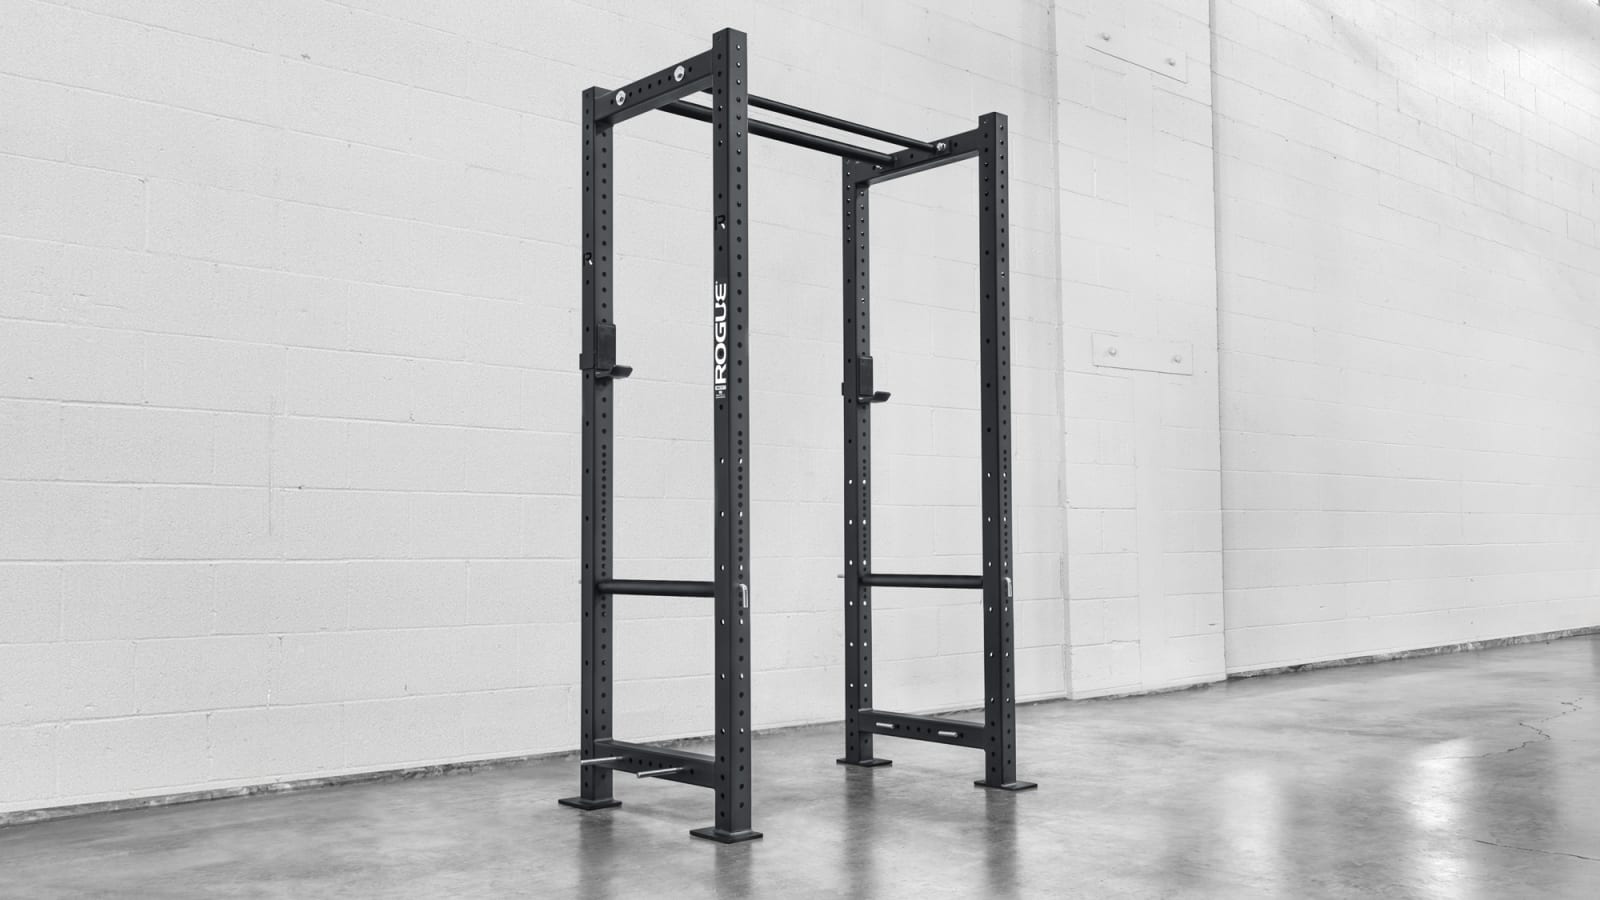 VGC –GREAT FULL SIZE Details about   Solid Metal West Side Rack R3 Weightlifting Cage by Rogue 